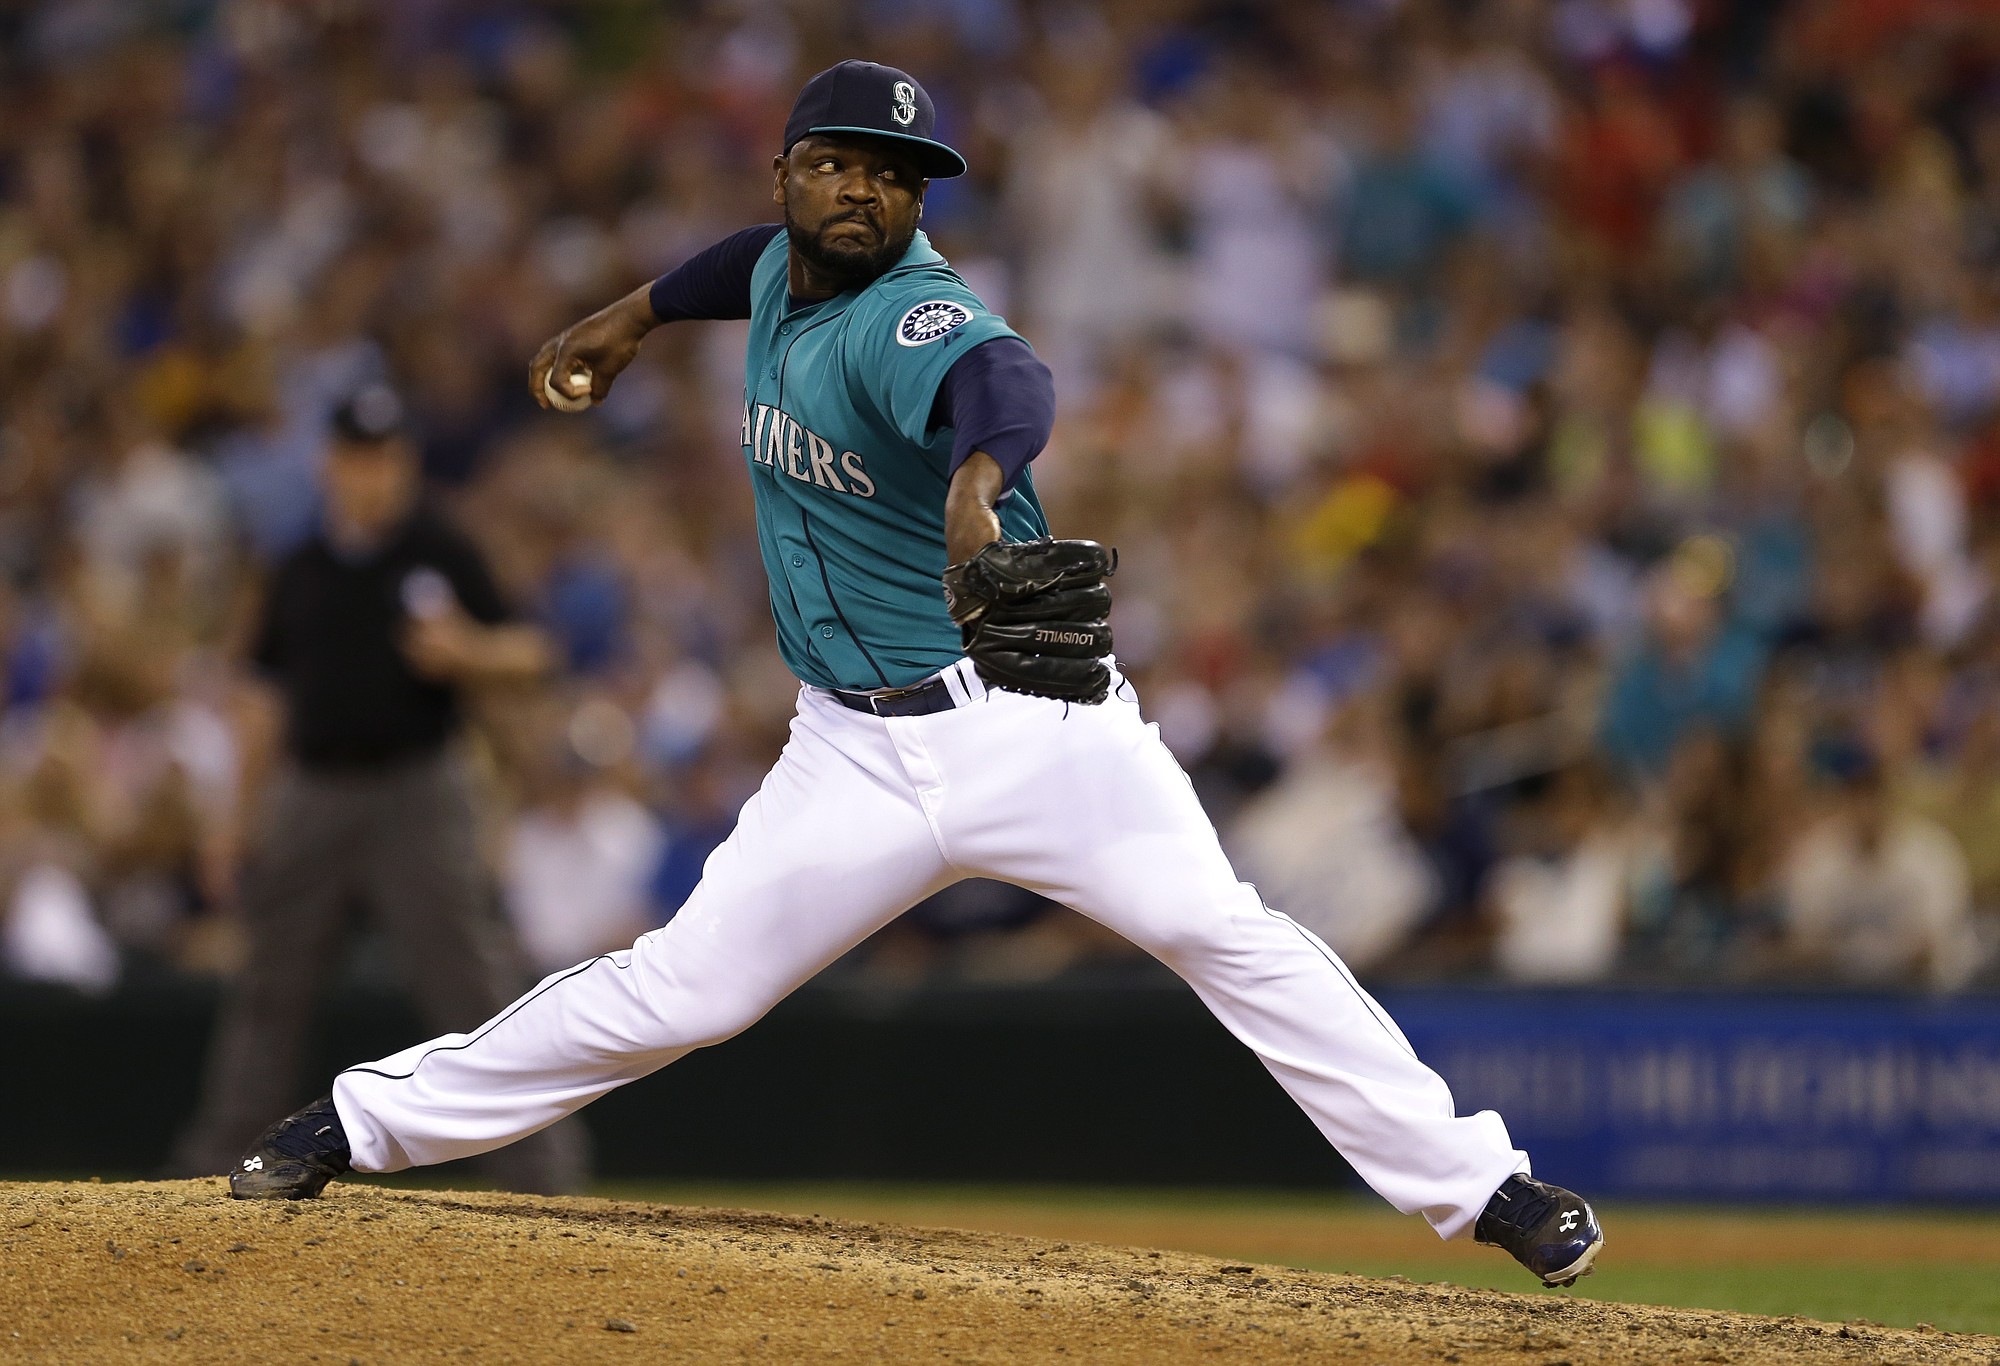 Seattle Mariners closer Fernando Rodney throws in the ninth inning of a baseball game against the Oakland Athletics, Friday, July 11, 2014, in Seattle. The Mariners won 3-2. (AP Photo/Ted S.